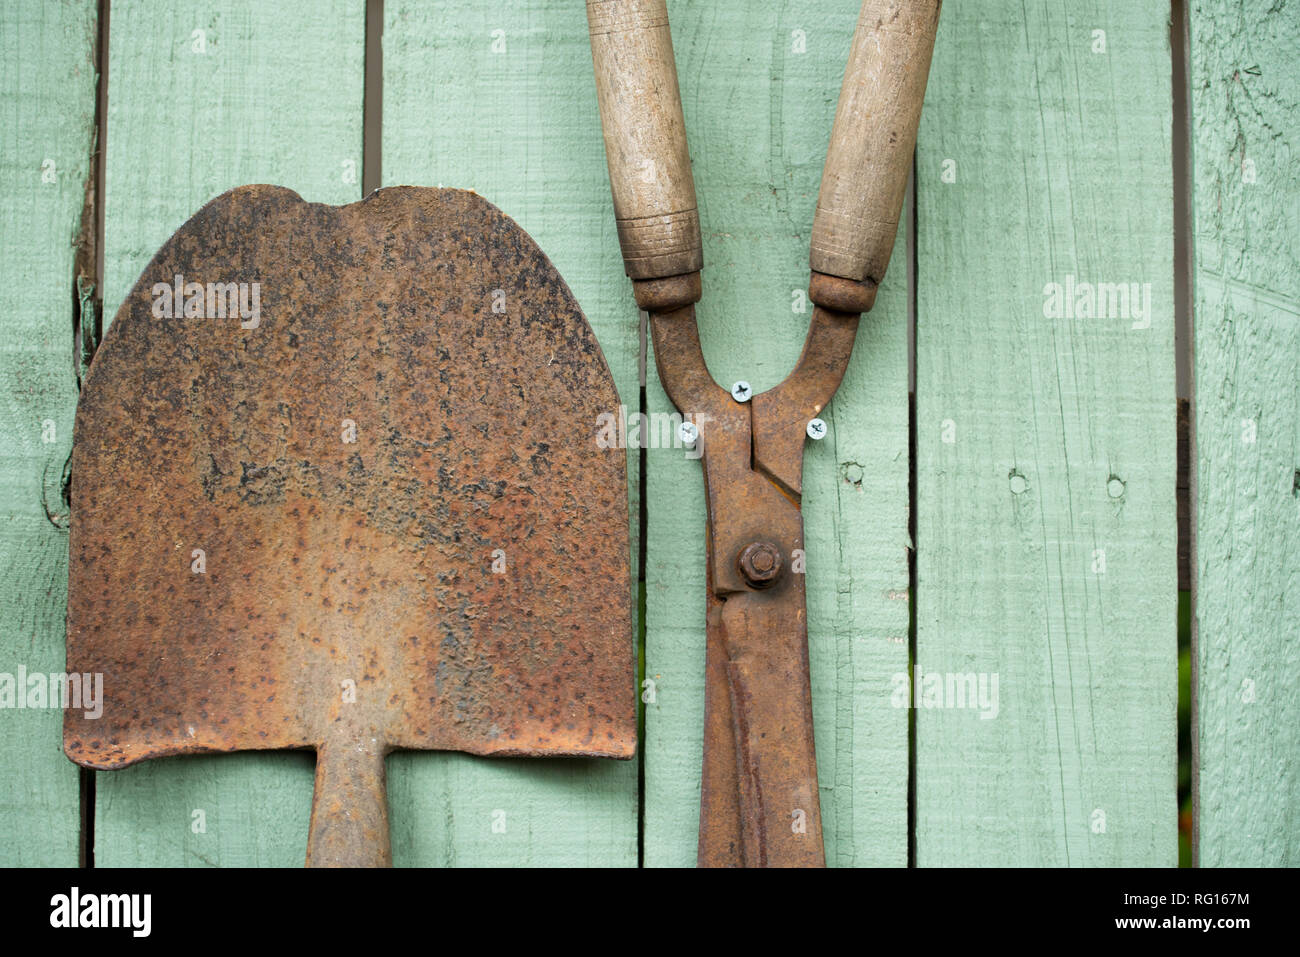 Old rusted gardening tools including a shovel and garden shears mounted on a timber garden fence painted green Stock Photo